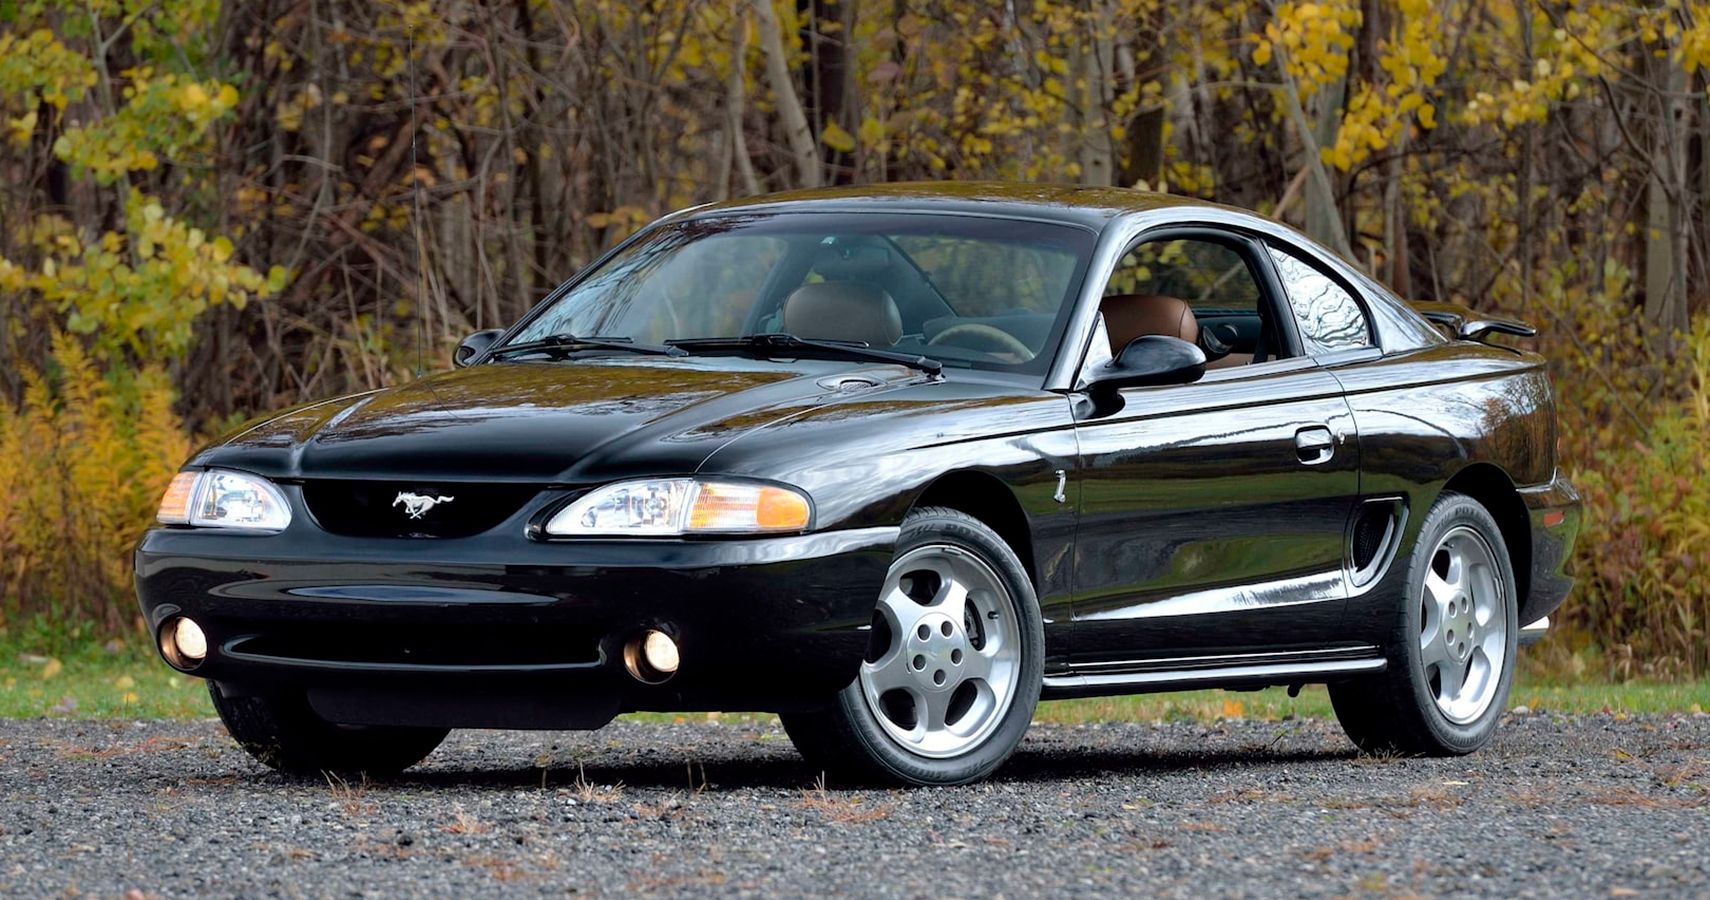 Generation Four Ford Mustang: 1994-2004 Intermediate Years